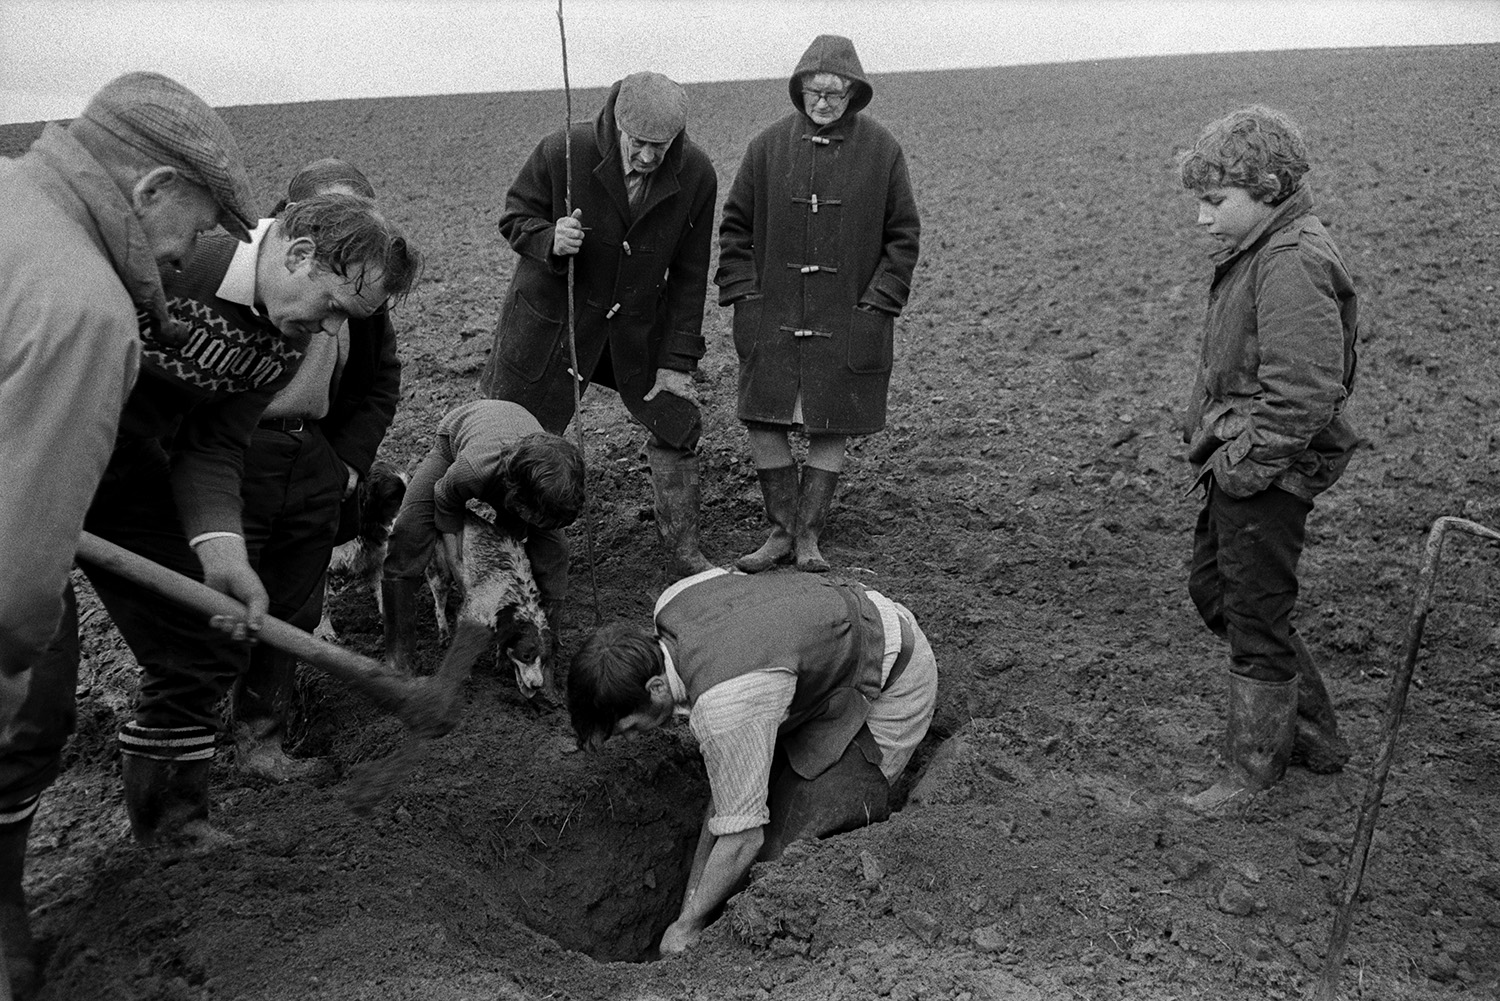 Huntsmen from the Stevenstone Hunt digging out a fox in a field at Taddiport. Hunt followers and children are watching. One child is holding a dog.